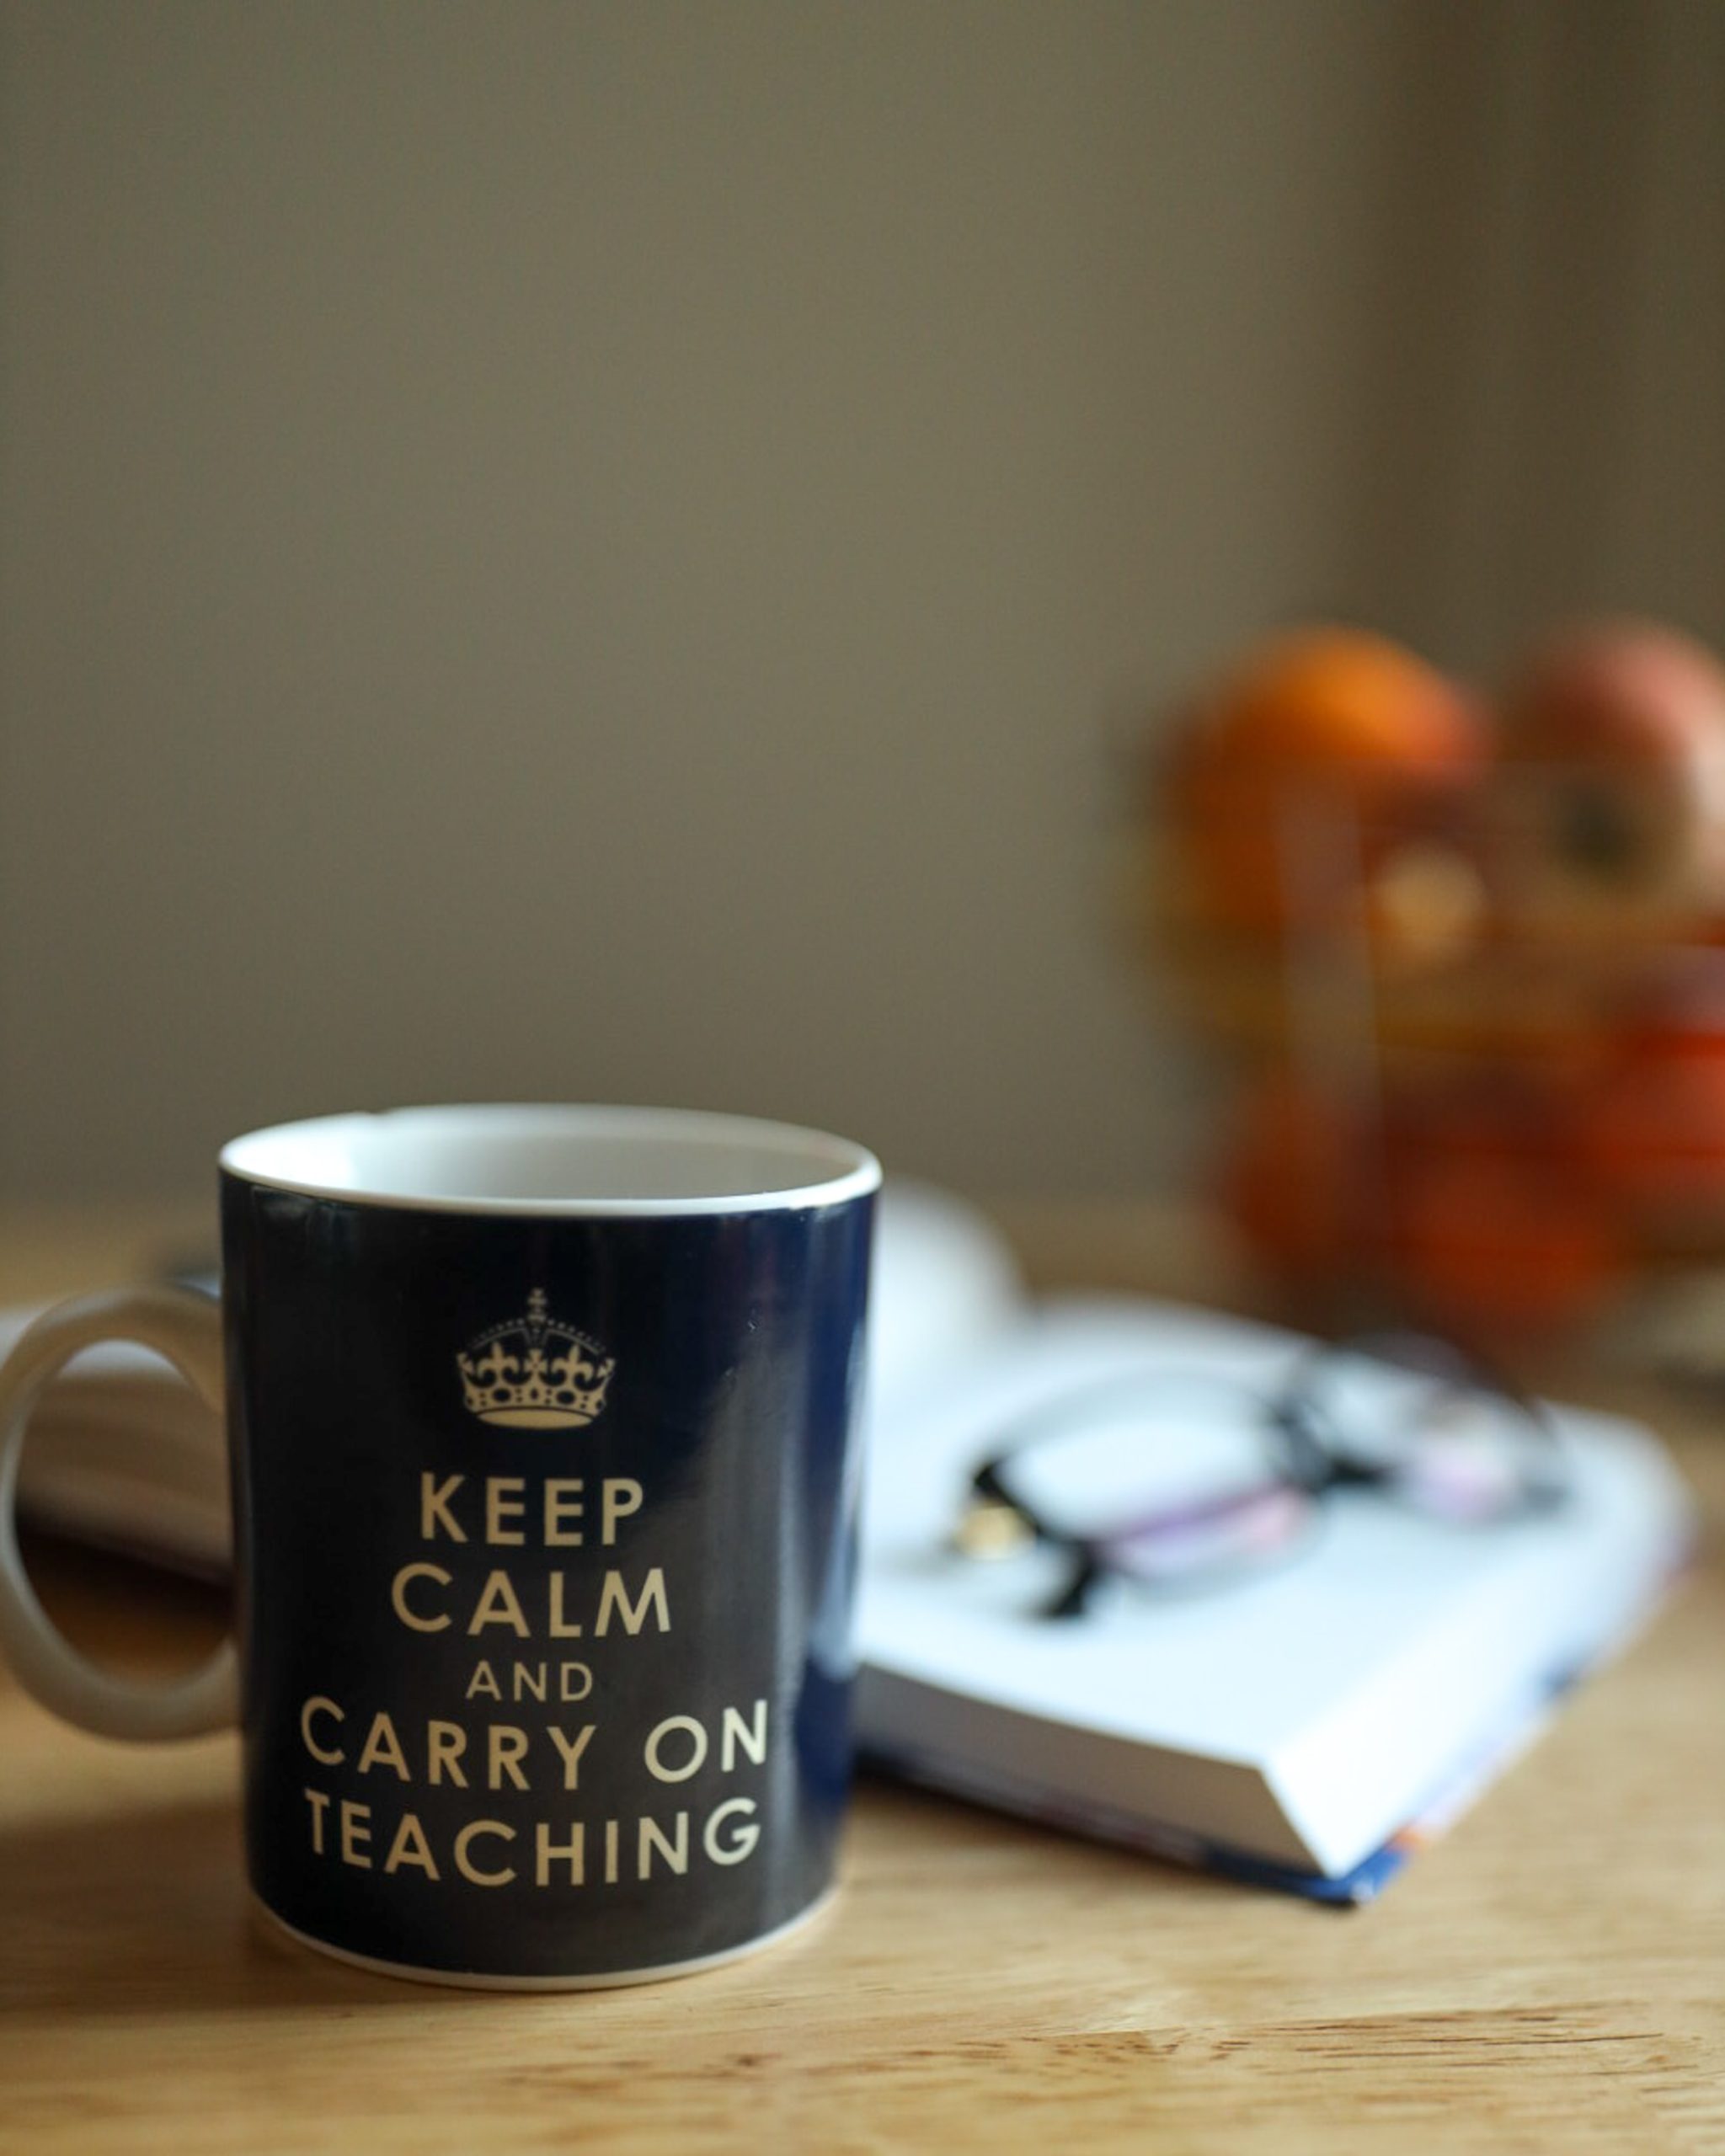 A mug with the saying "Keep calm and carry on teaching."